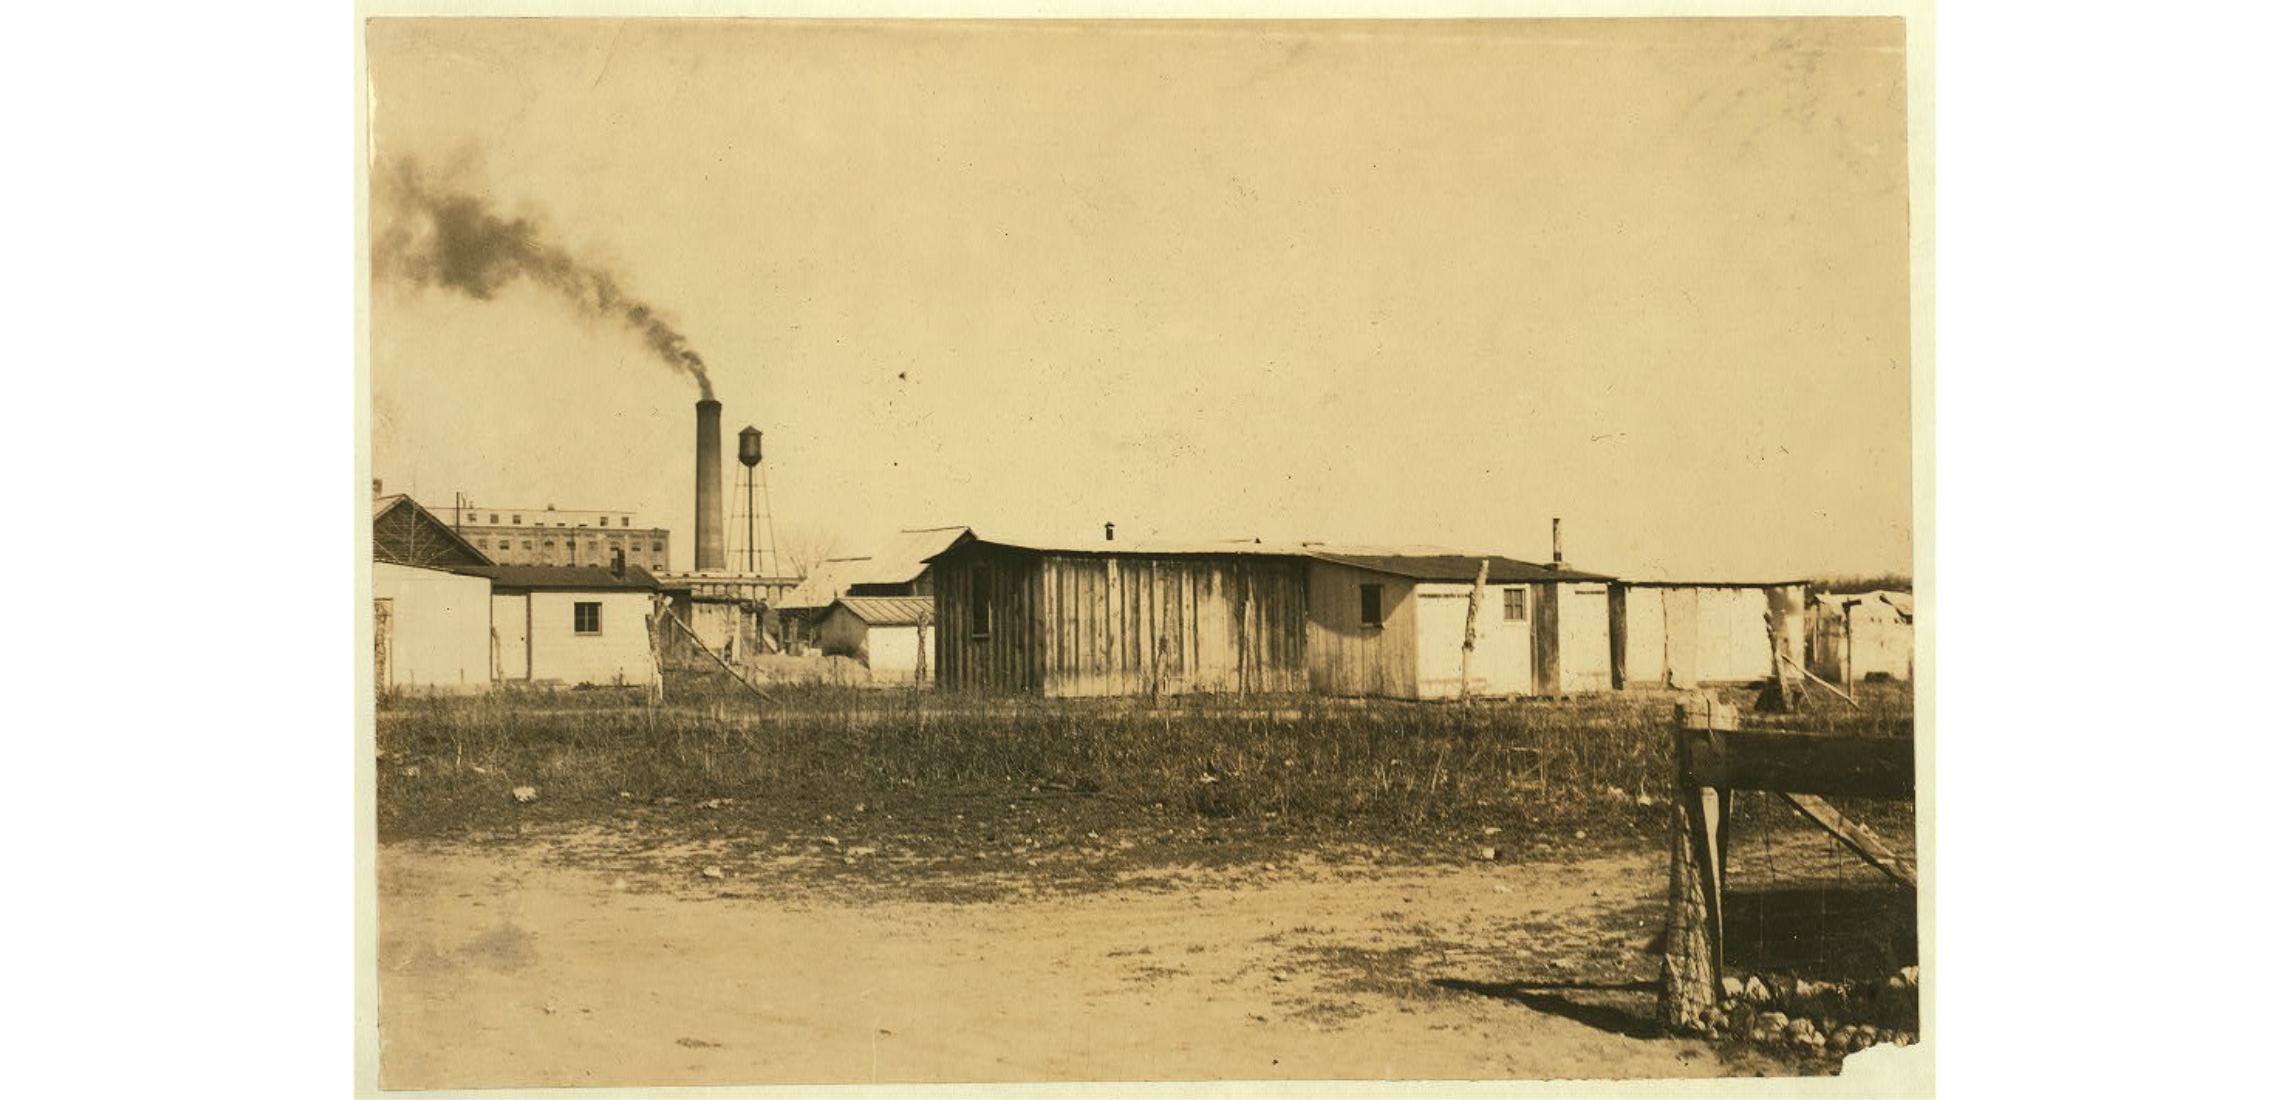 Photo of factory buildings. Many of the buildings are small one-story structures, while in the distance multi-story large buildings and a billowing smoke stack are seen. A water tower is also standing tall in the distance. No people are visible in this historic black and white image.